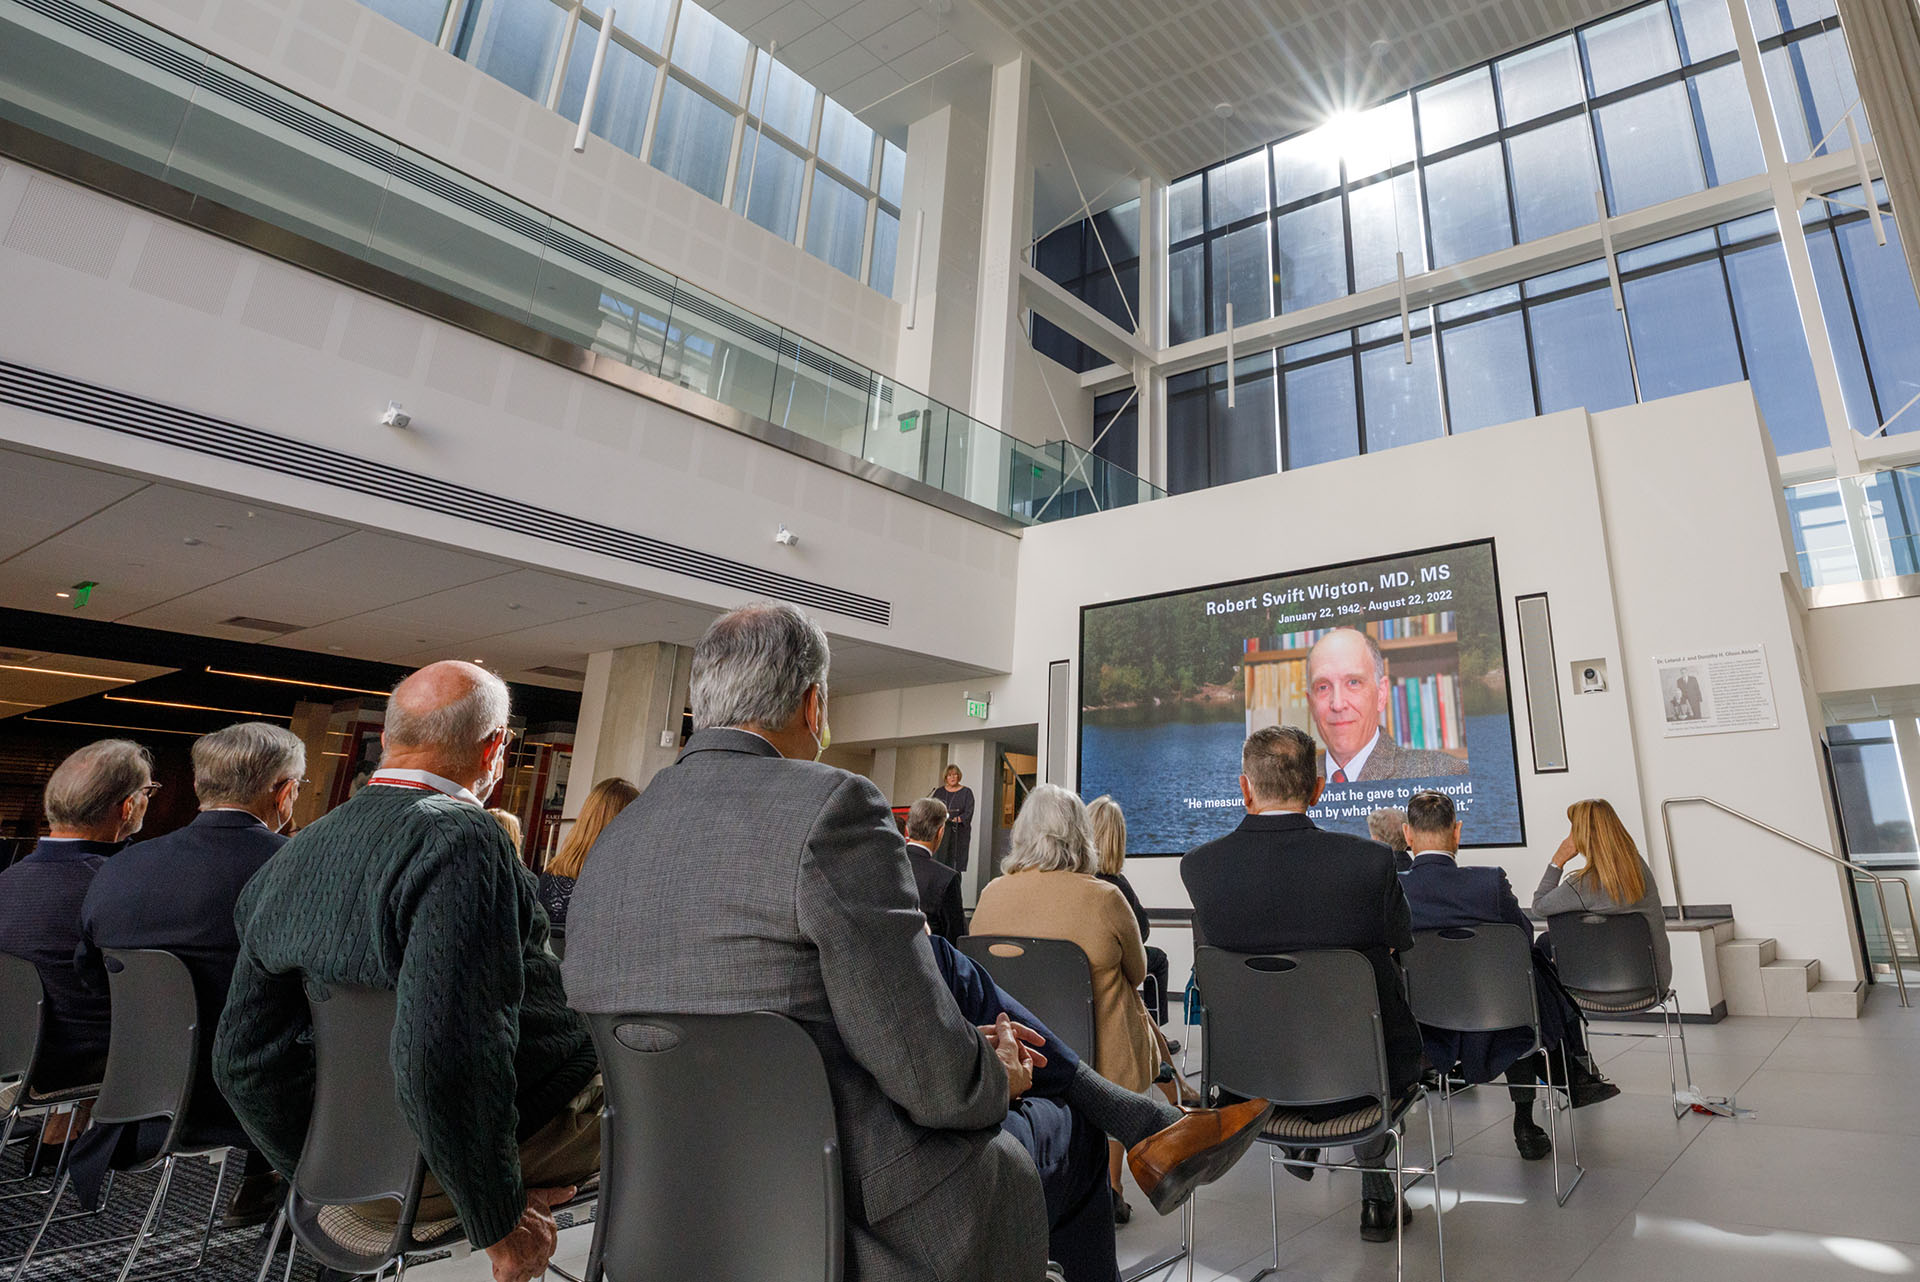 The celebration of life for Robert Wigton&comma; MD&comma; was held in the sunlit Olson Atrium inside the Wigton Heritage Center on Oct&period; 17&period;